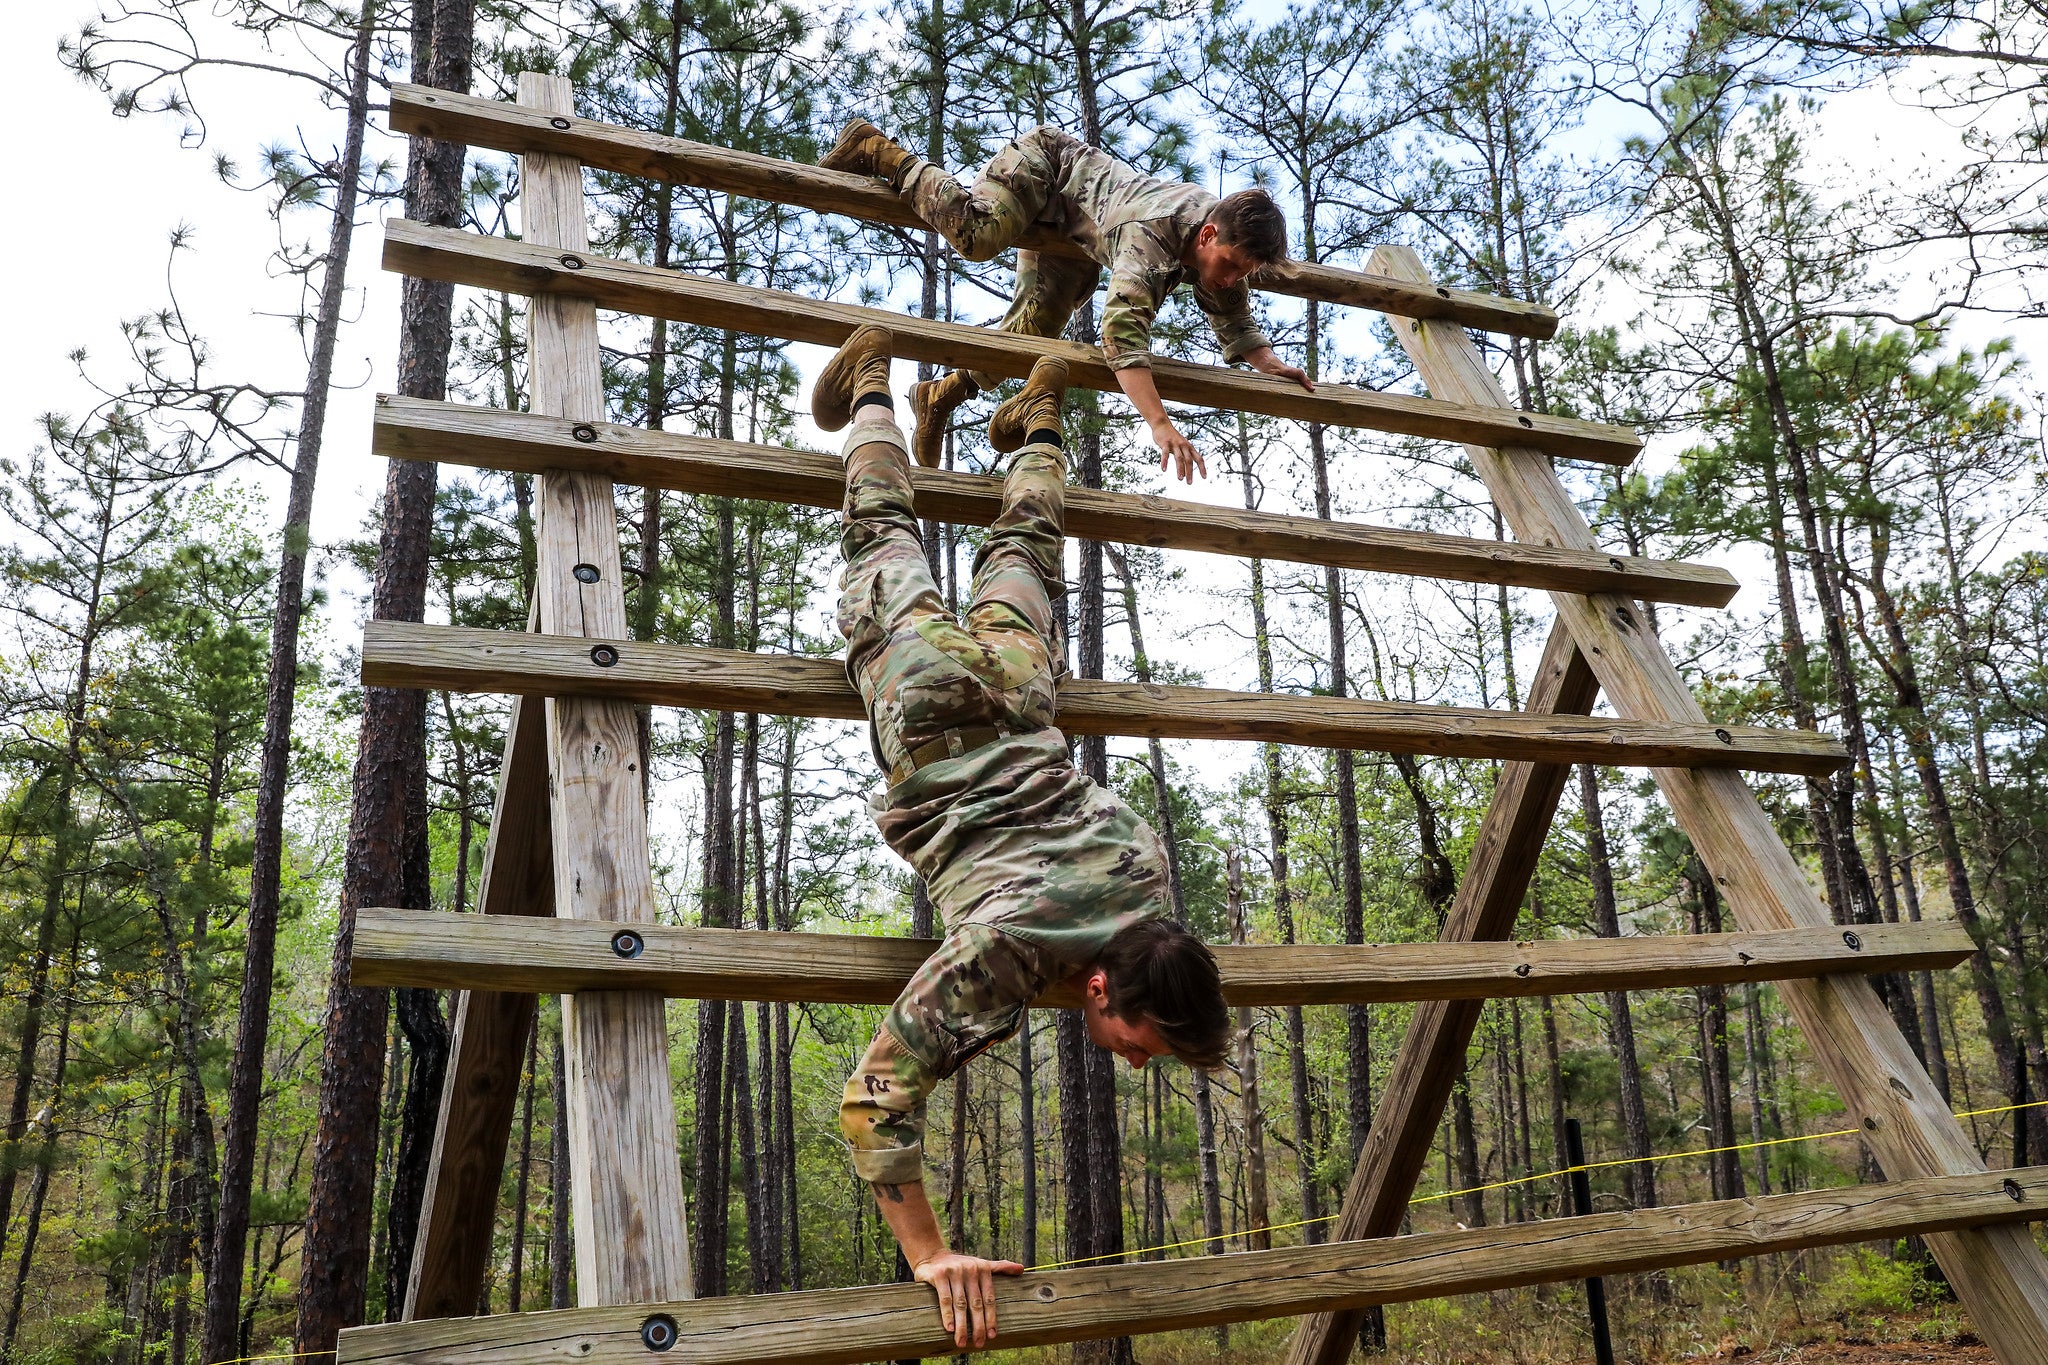 How to train like an elite Army Ranger, according to a Best Ranger coach